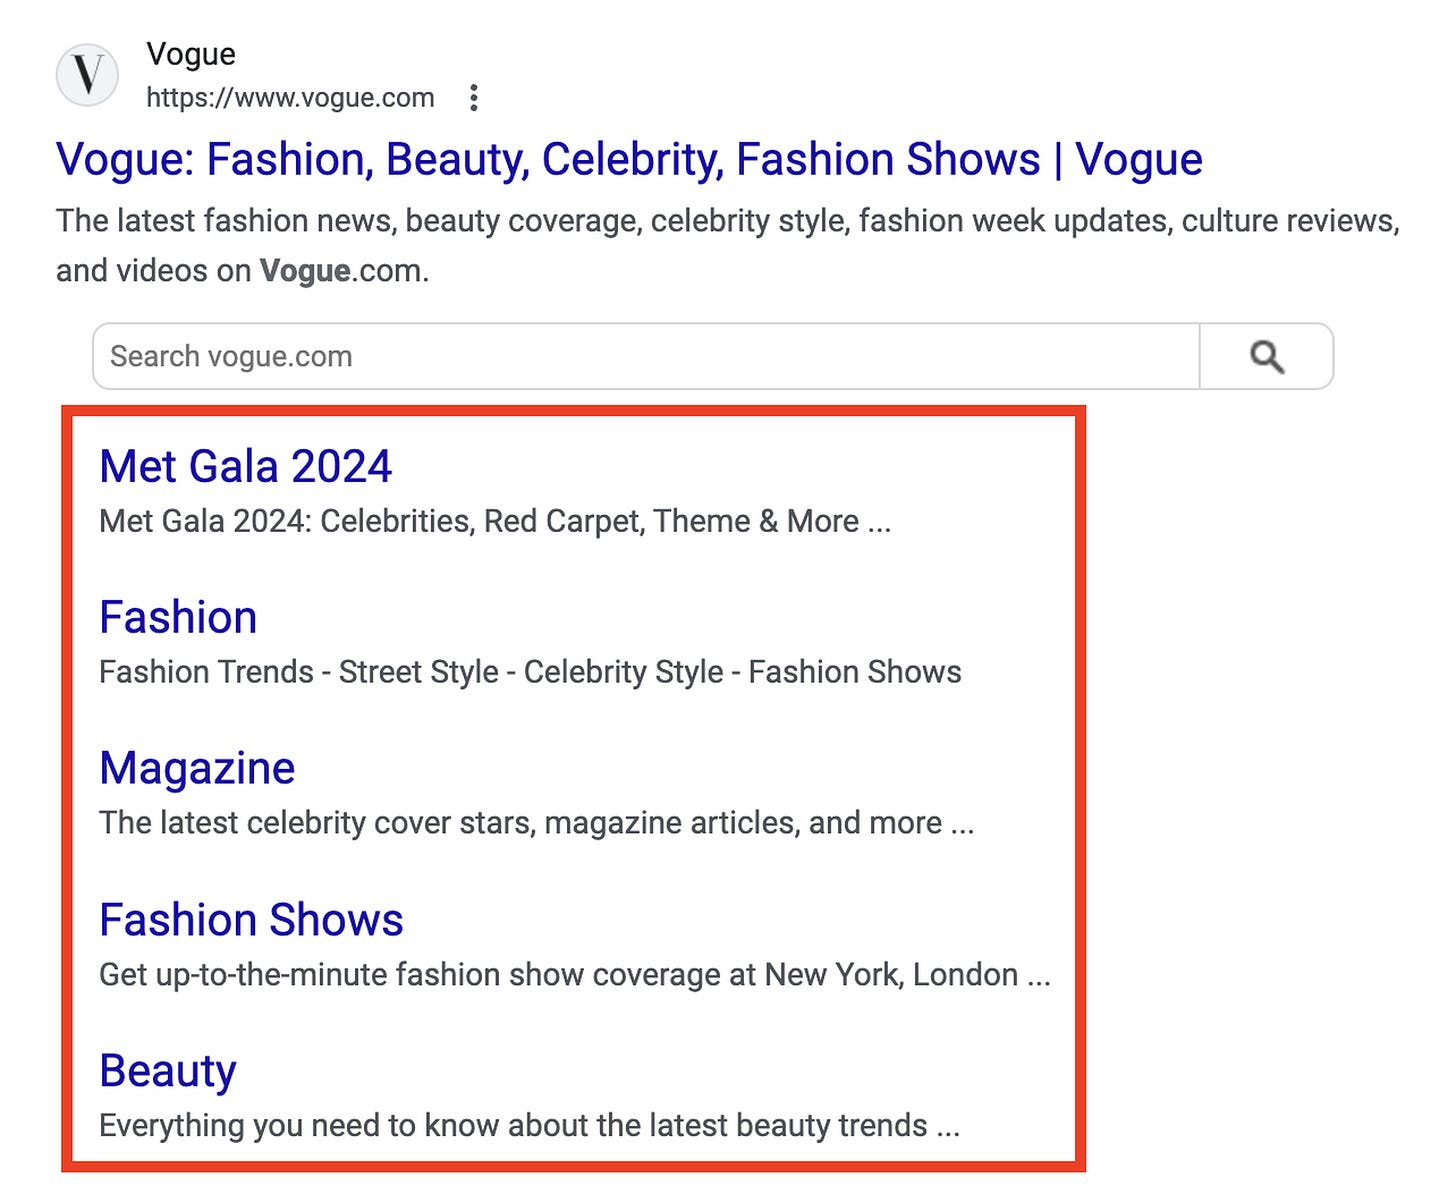 A Google Search screenshot of the Vogue.com result, with sublinks below the main homepage. The links direct to sections like “Met Gala 2024” and “Beauty.”